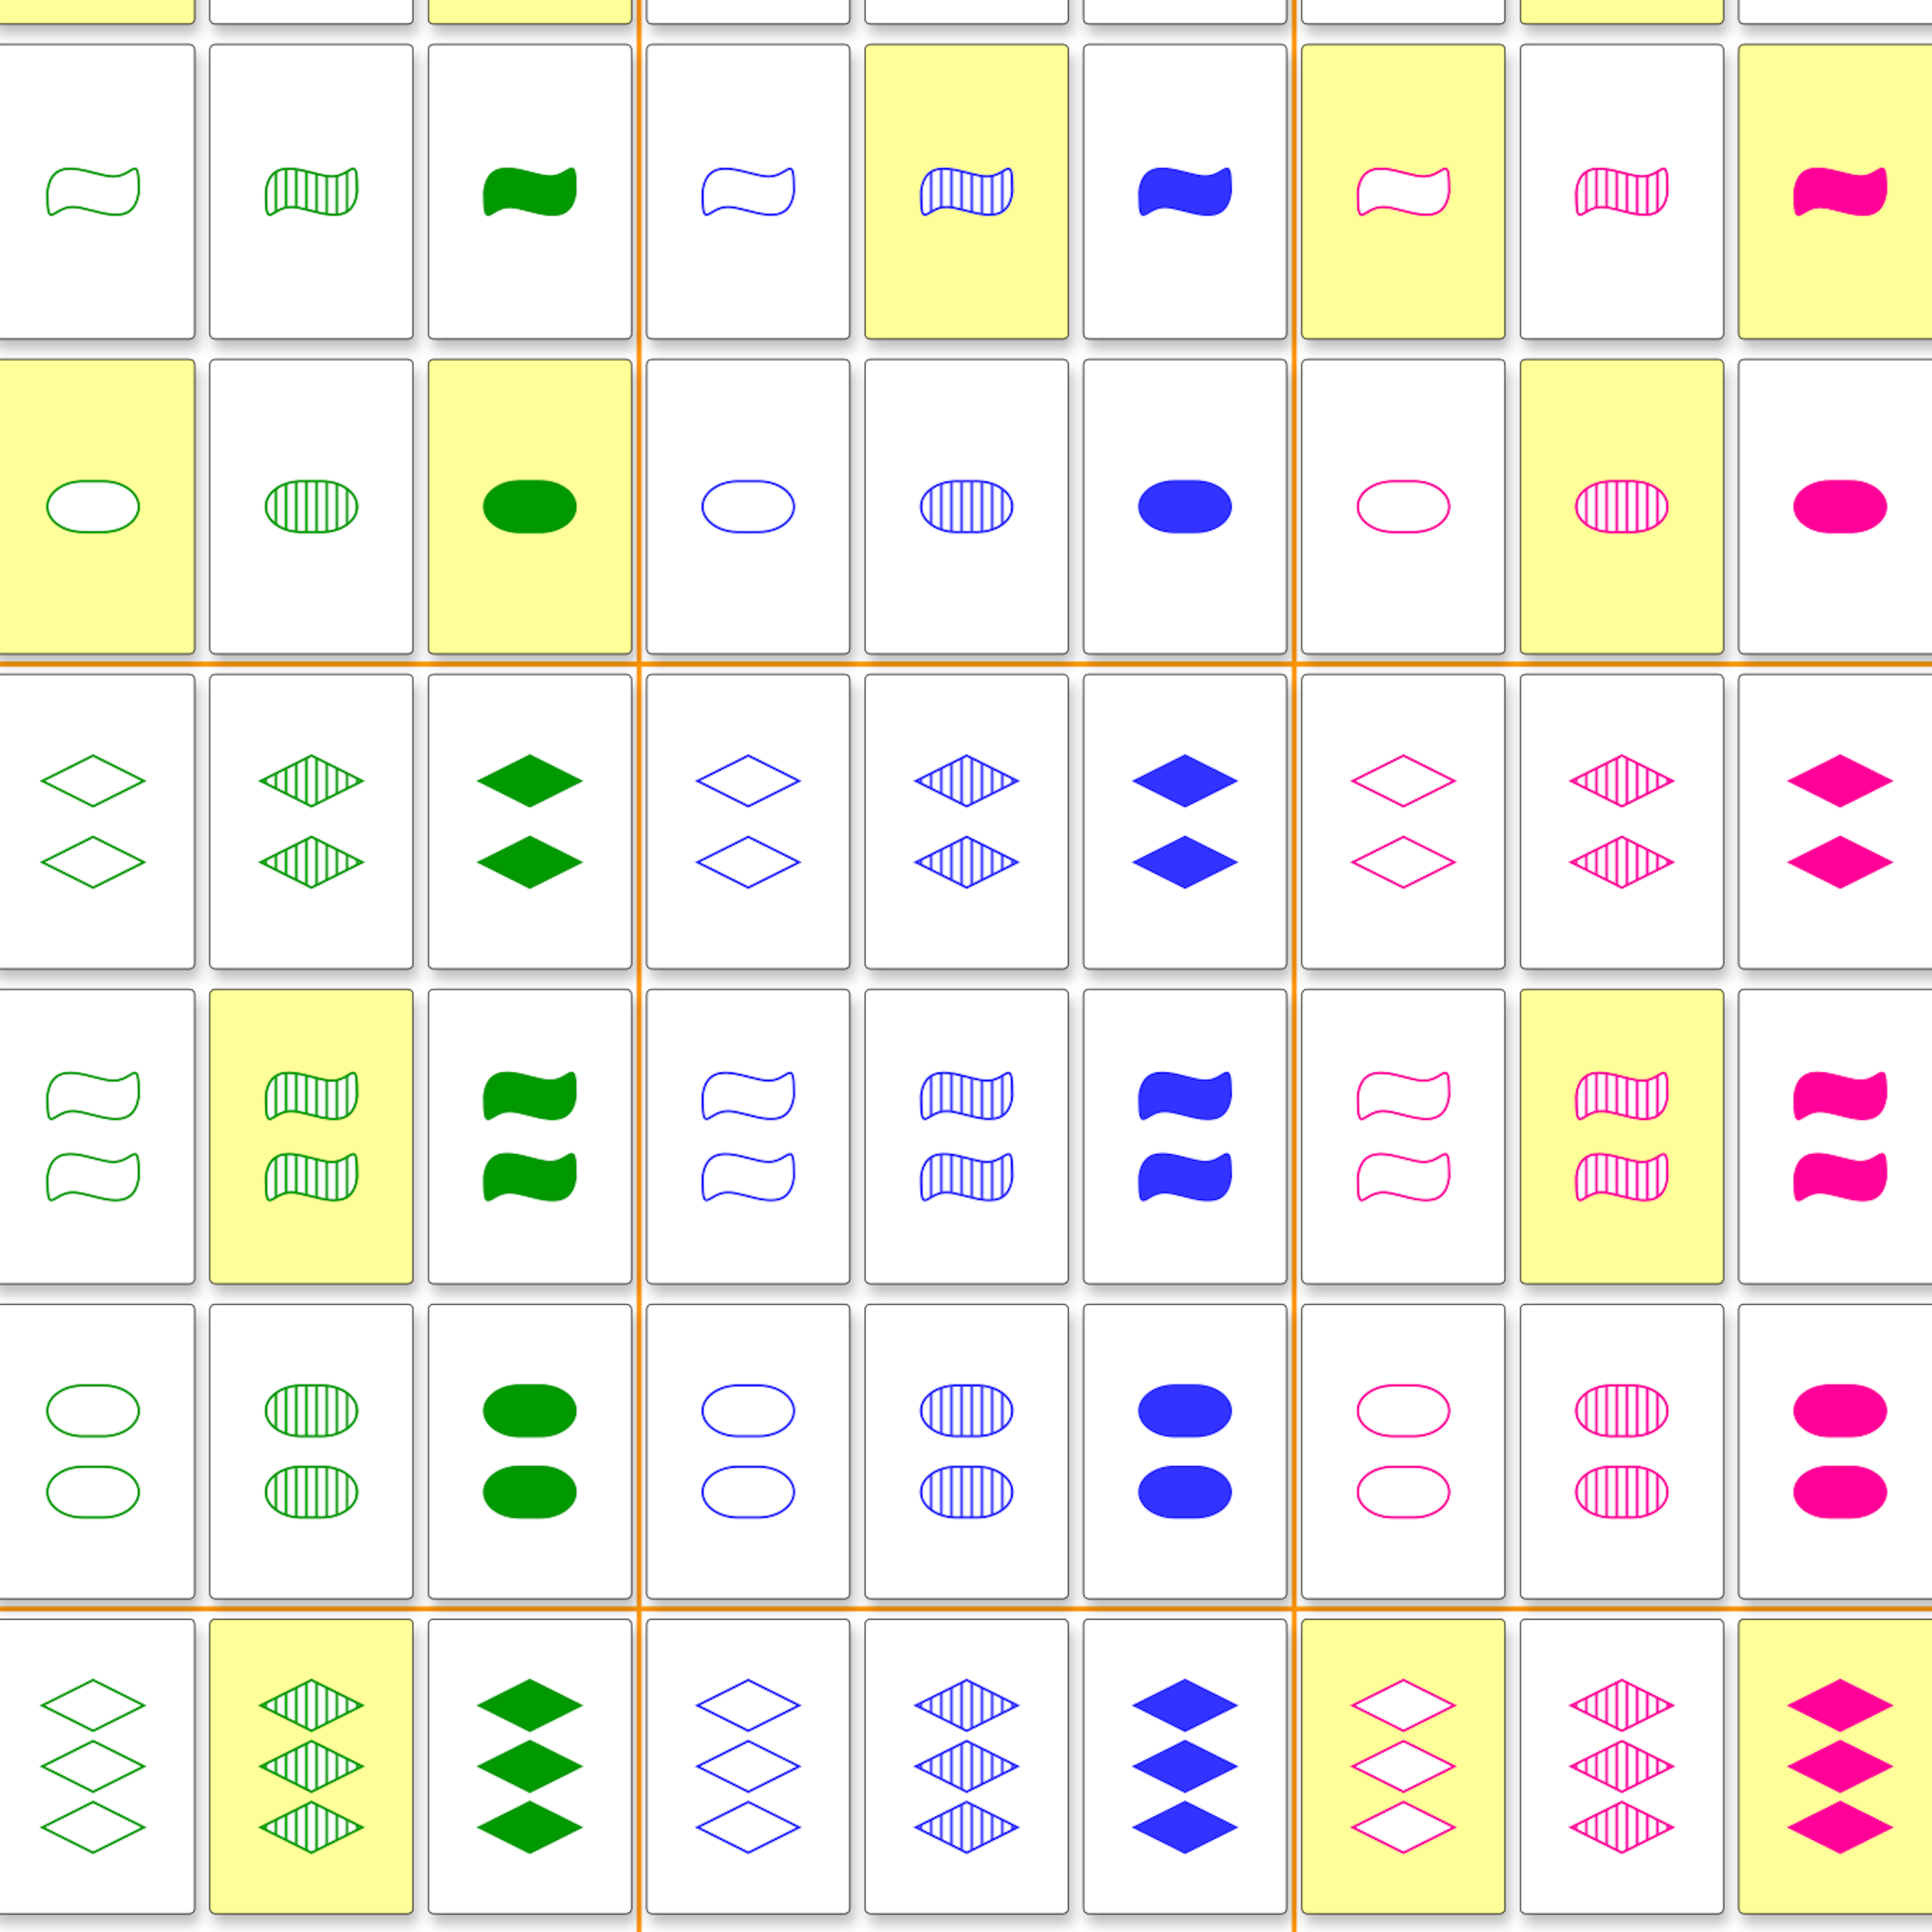 Grid of cards with one of three shapes, colors and patterns